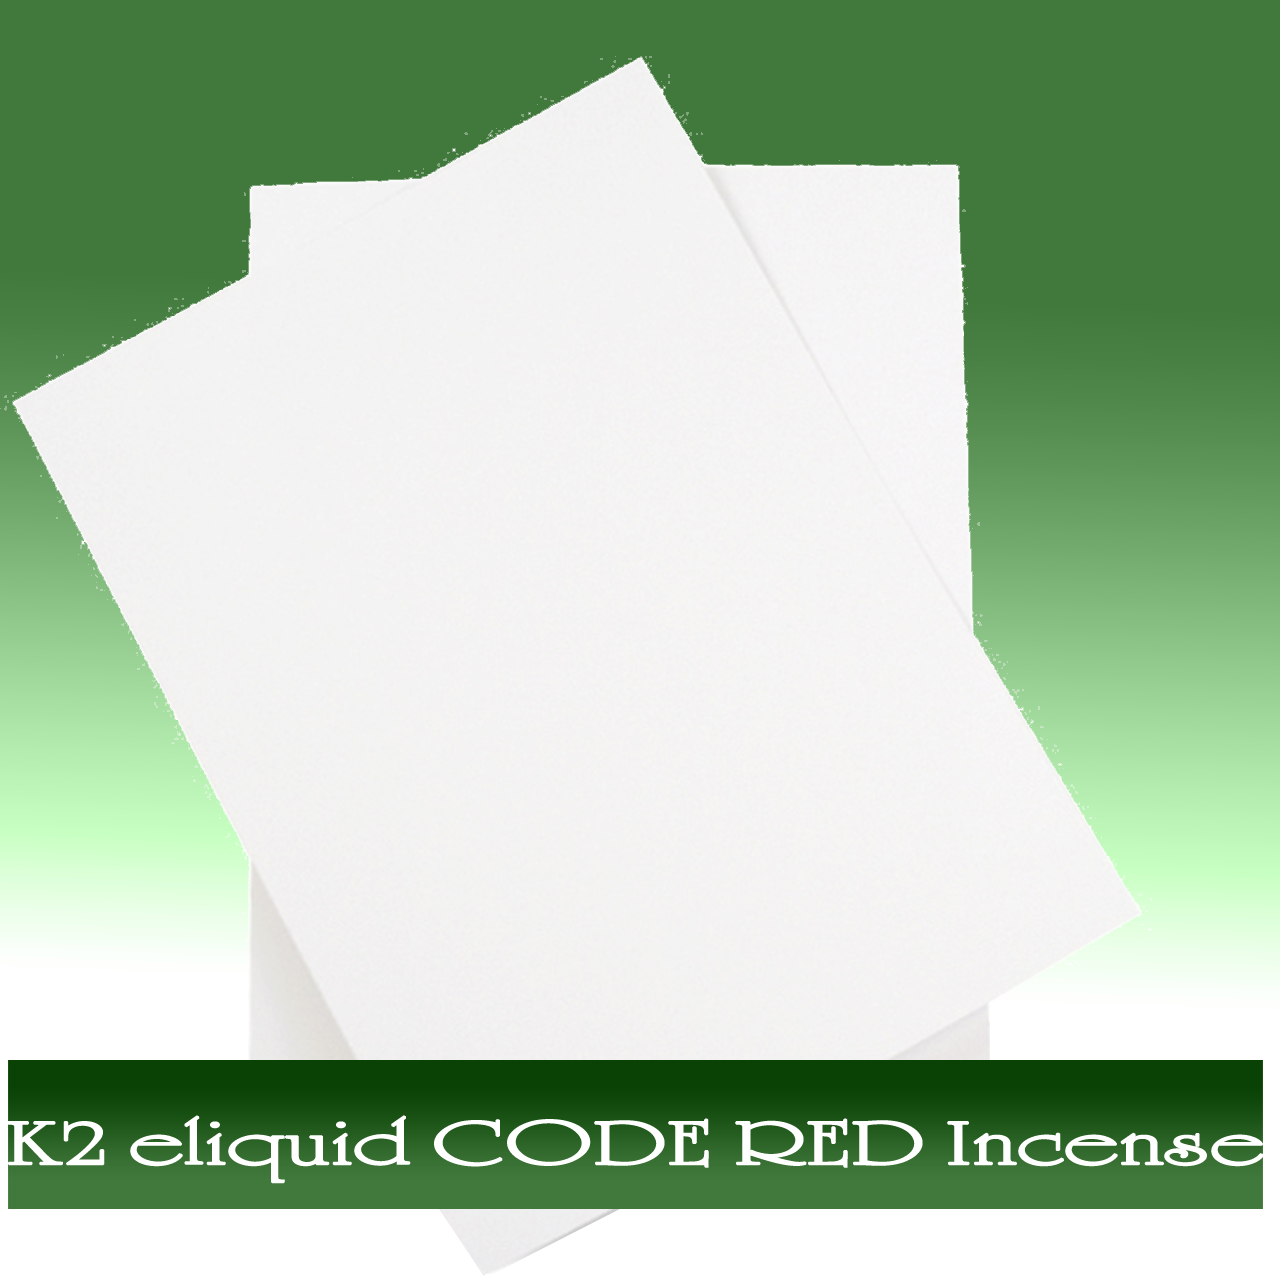 K2 e-liquid CODE RED Incense On Paper Online